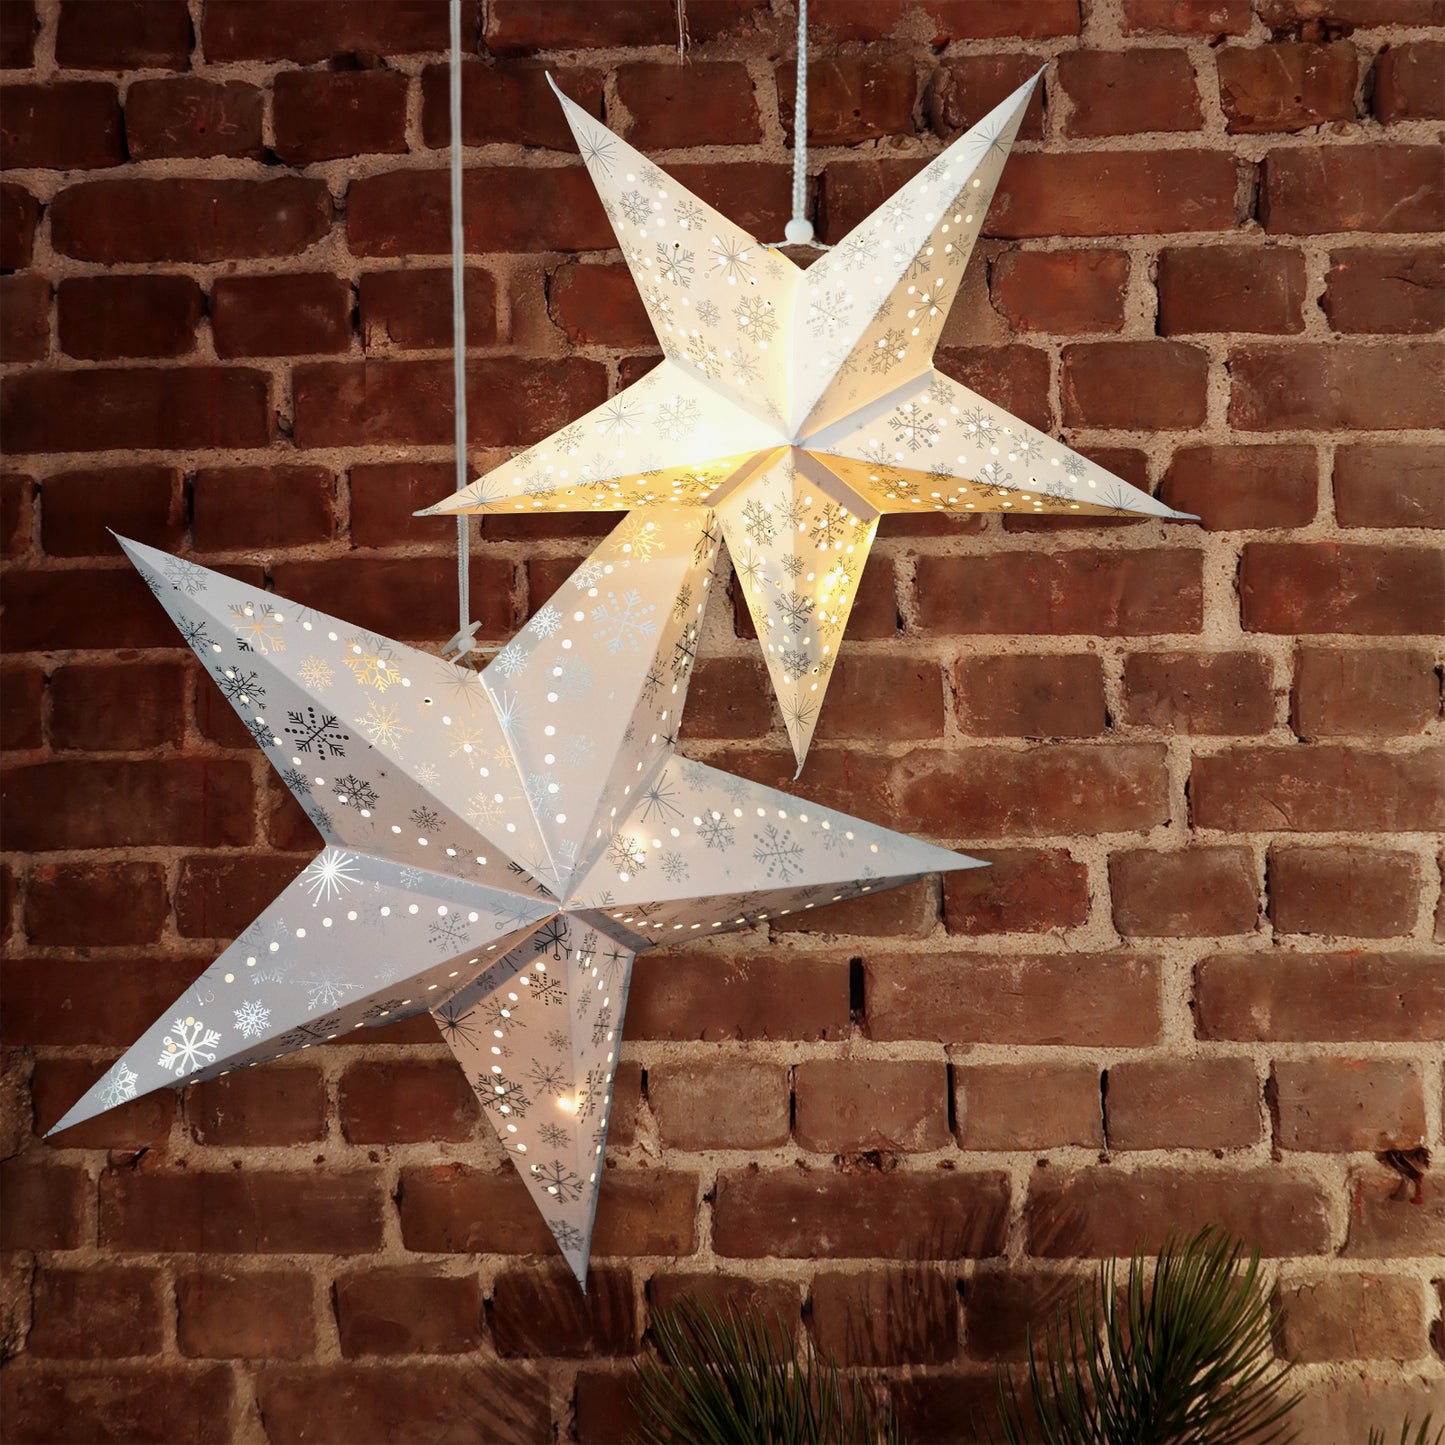 LED 60 cm Silver Snowflakes Hanging Paper Star by Geezy - UKBuyZone